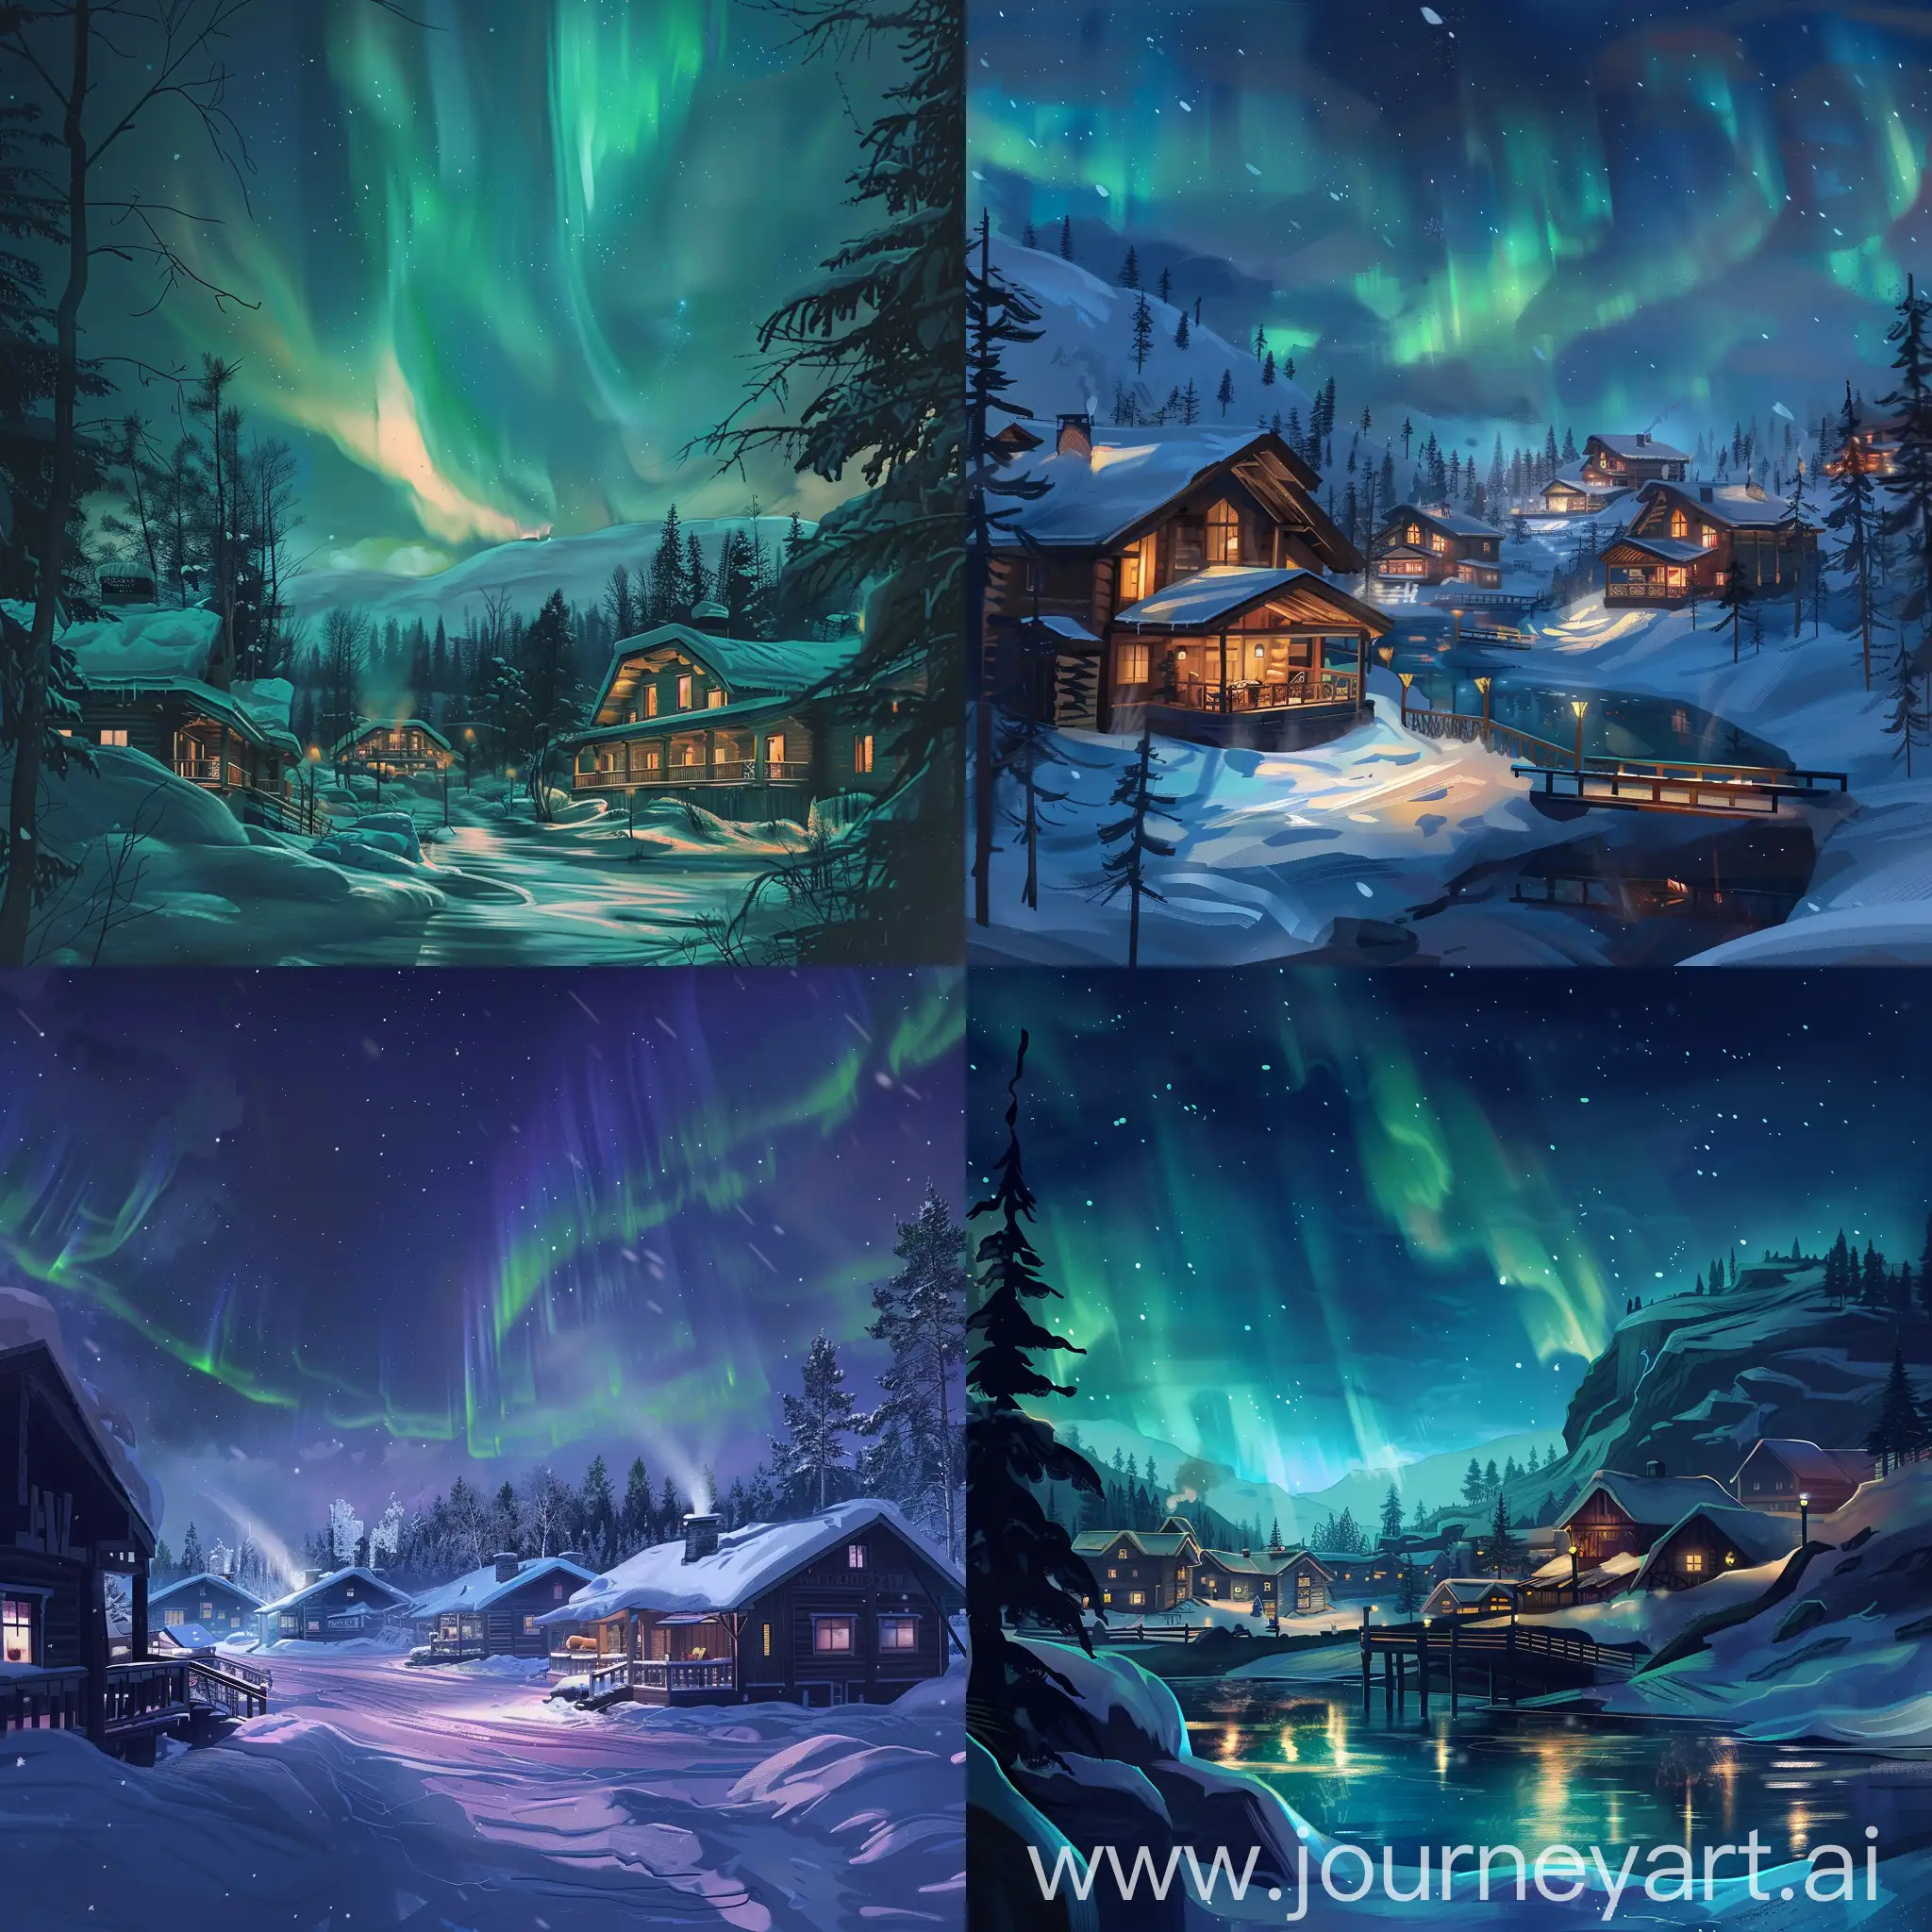 Draw a realistic resort in the north of Russia with the northern lights